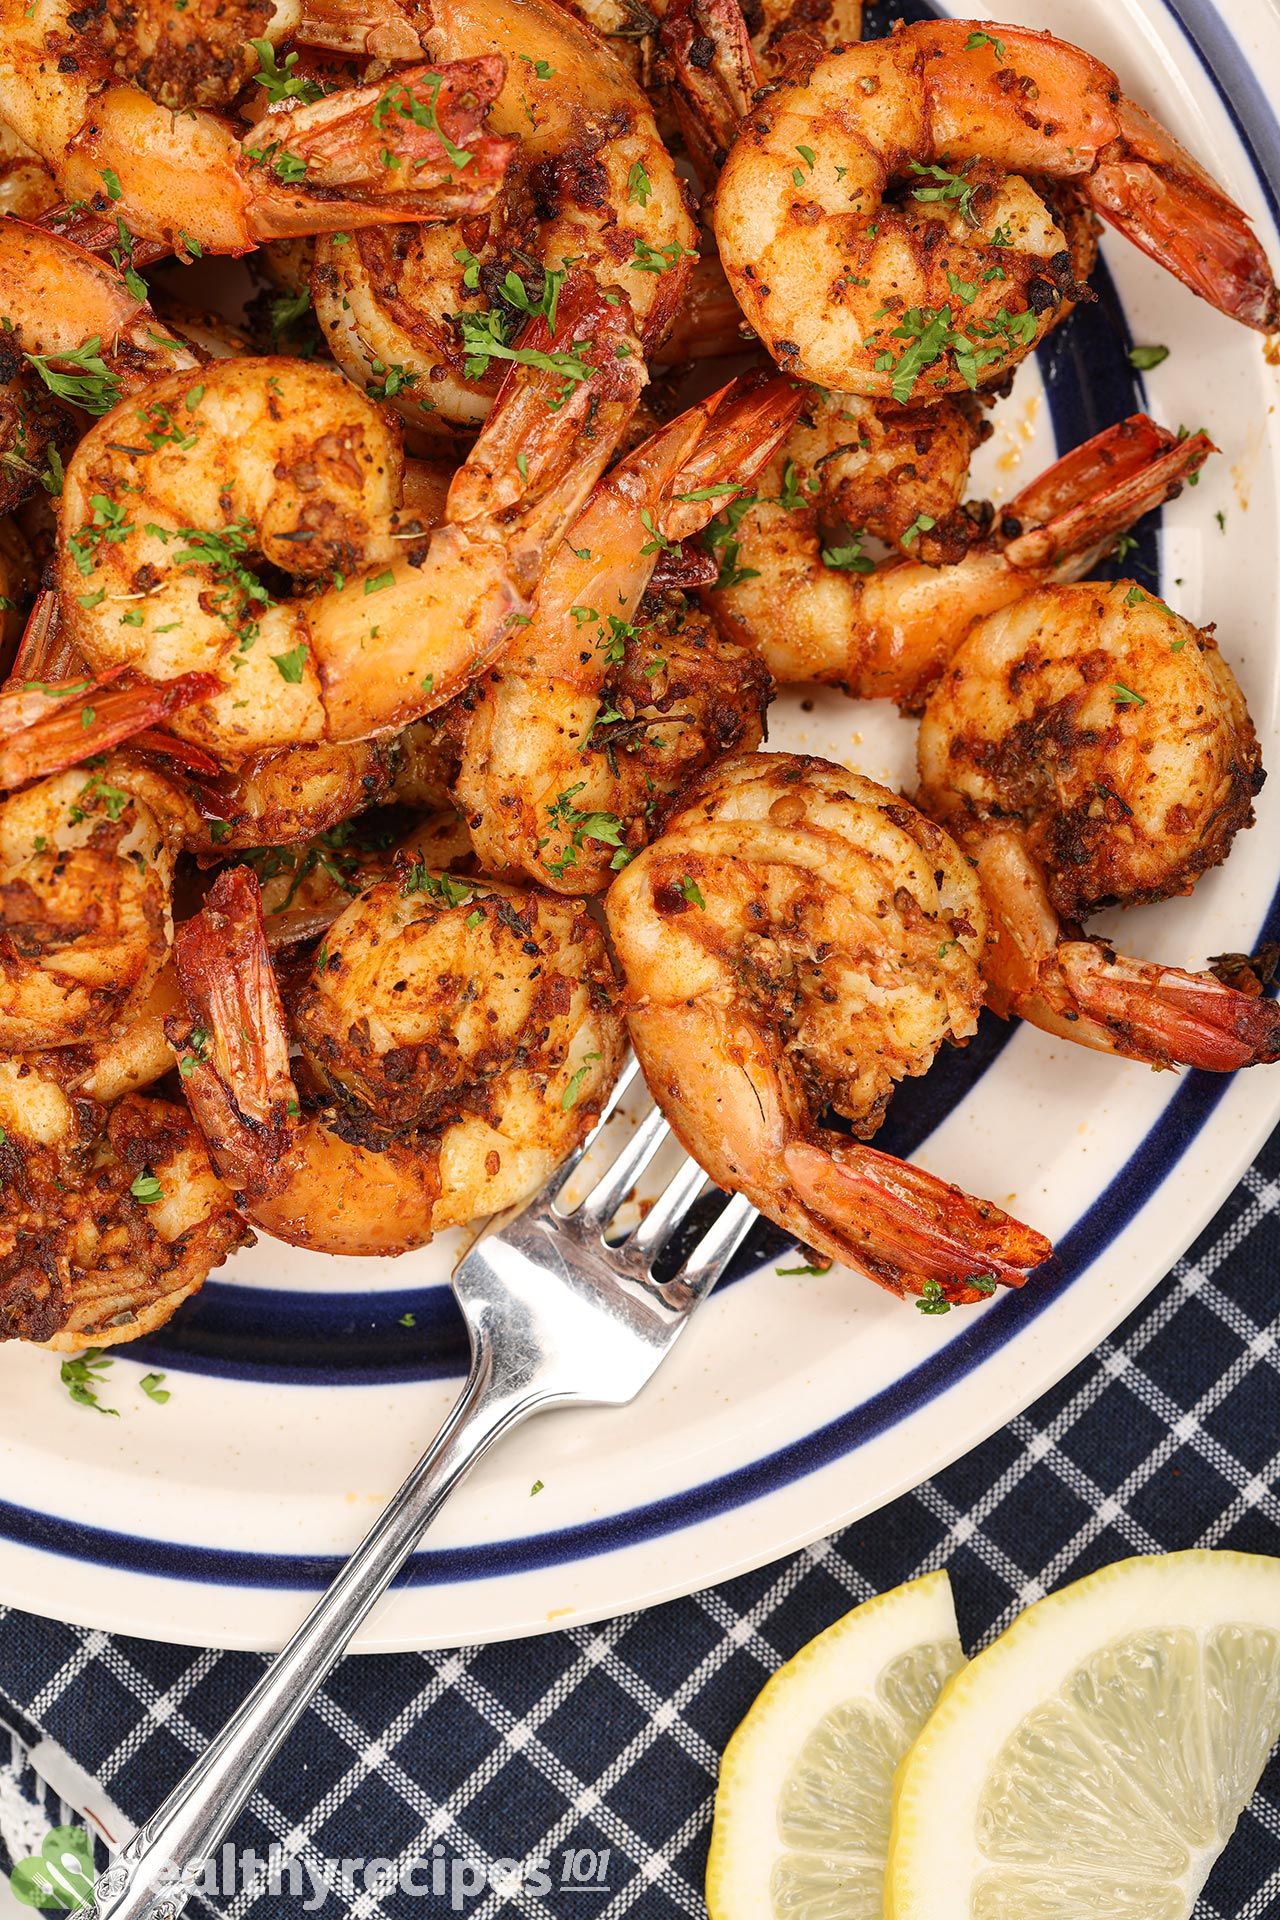 vHow to Store and Reheat Cooked Shrimp